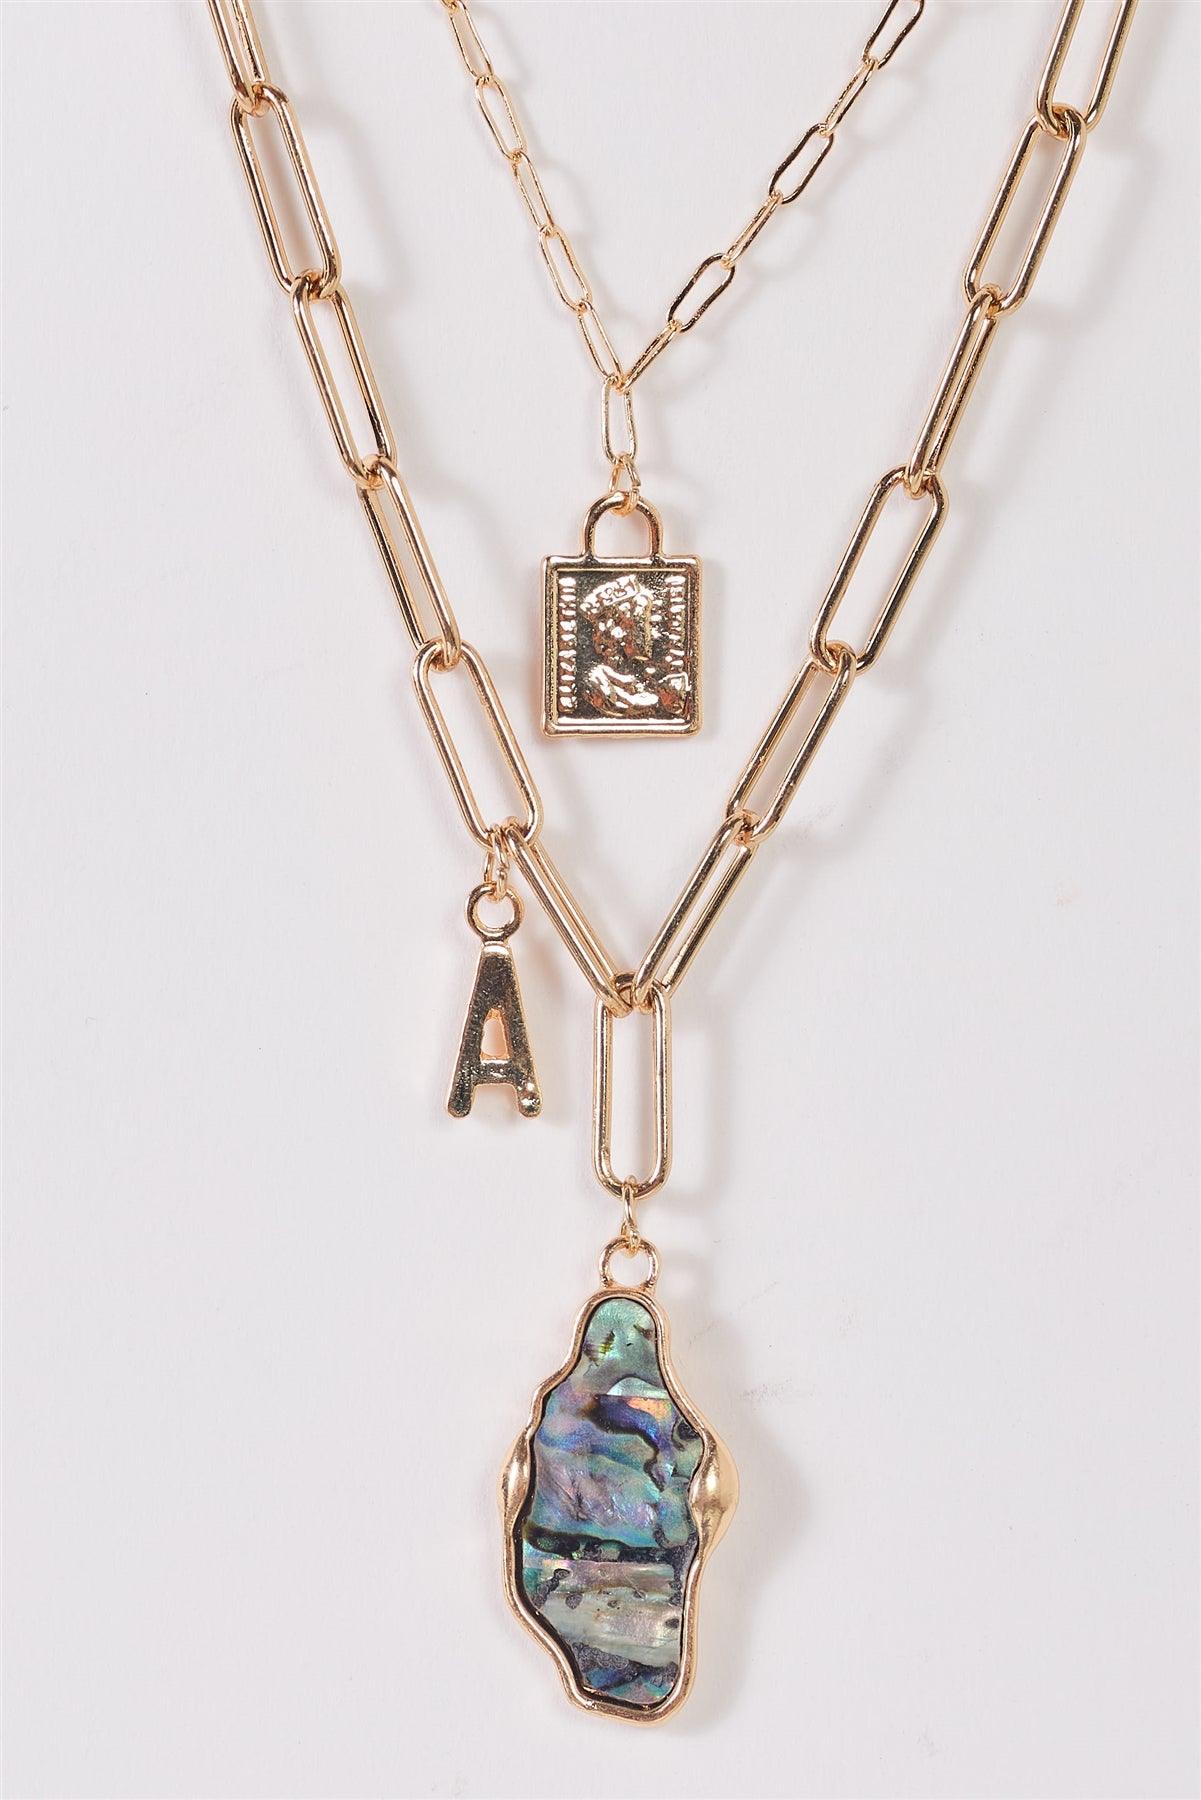 Gold Double Paper Clip Chain With Abalone Asymmetrical Pendant And Rectangle & "A" Letter Charms Necklace /3 Pieces